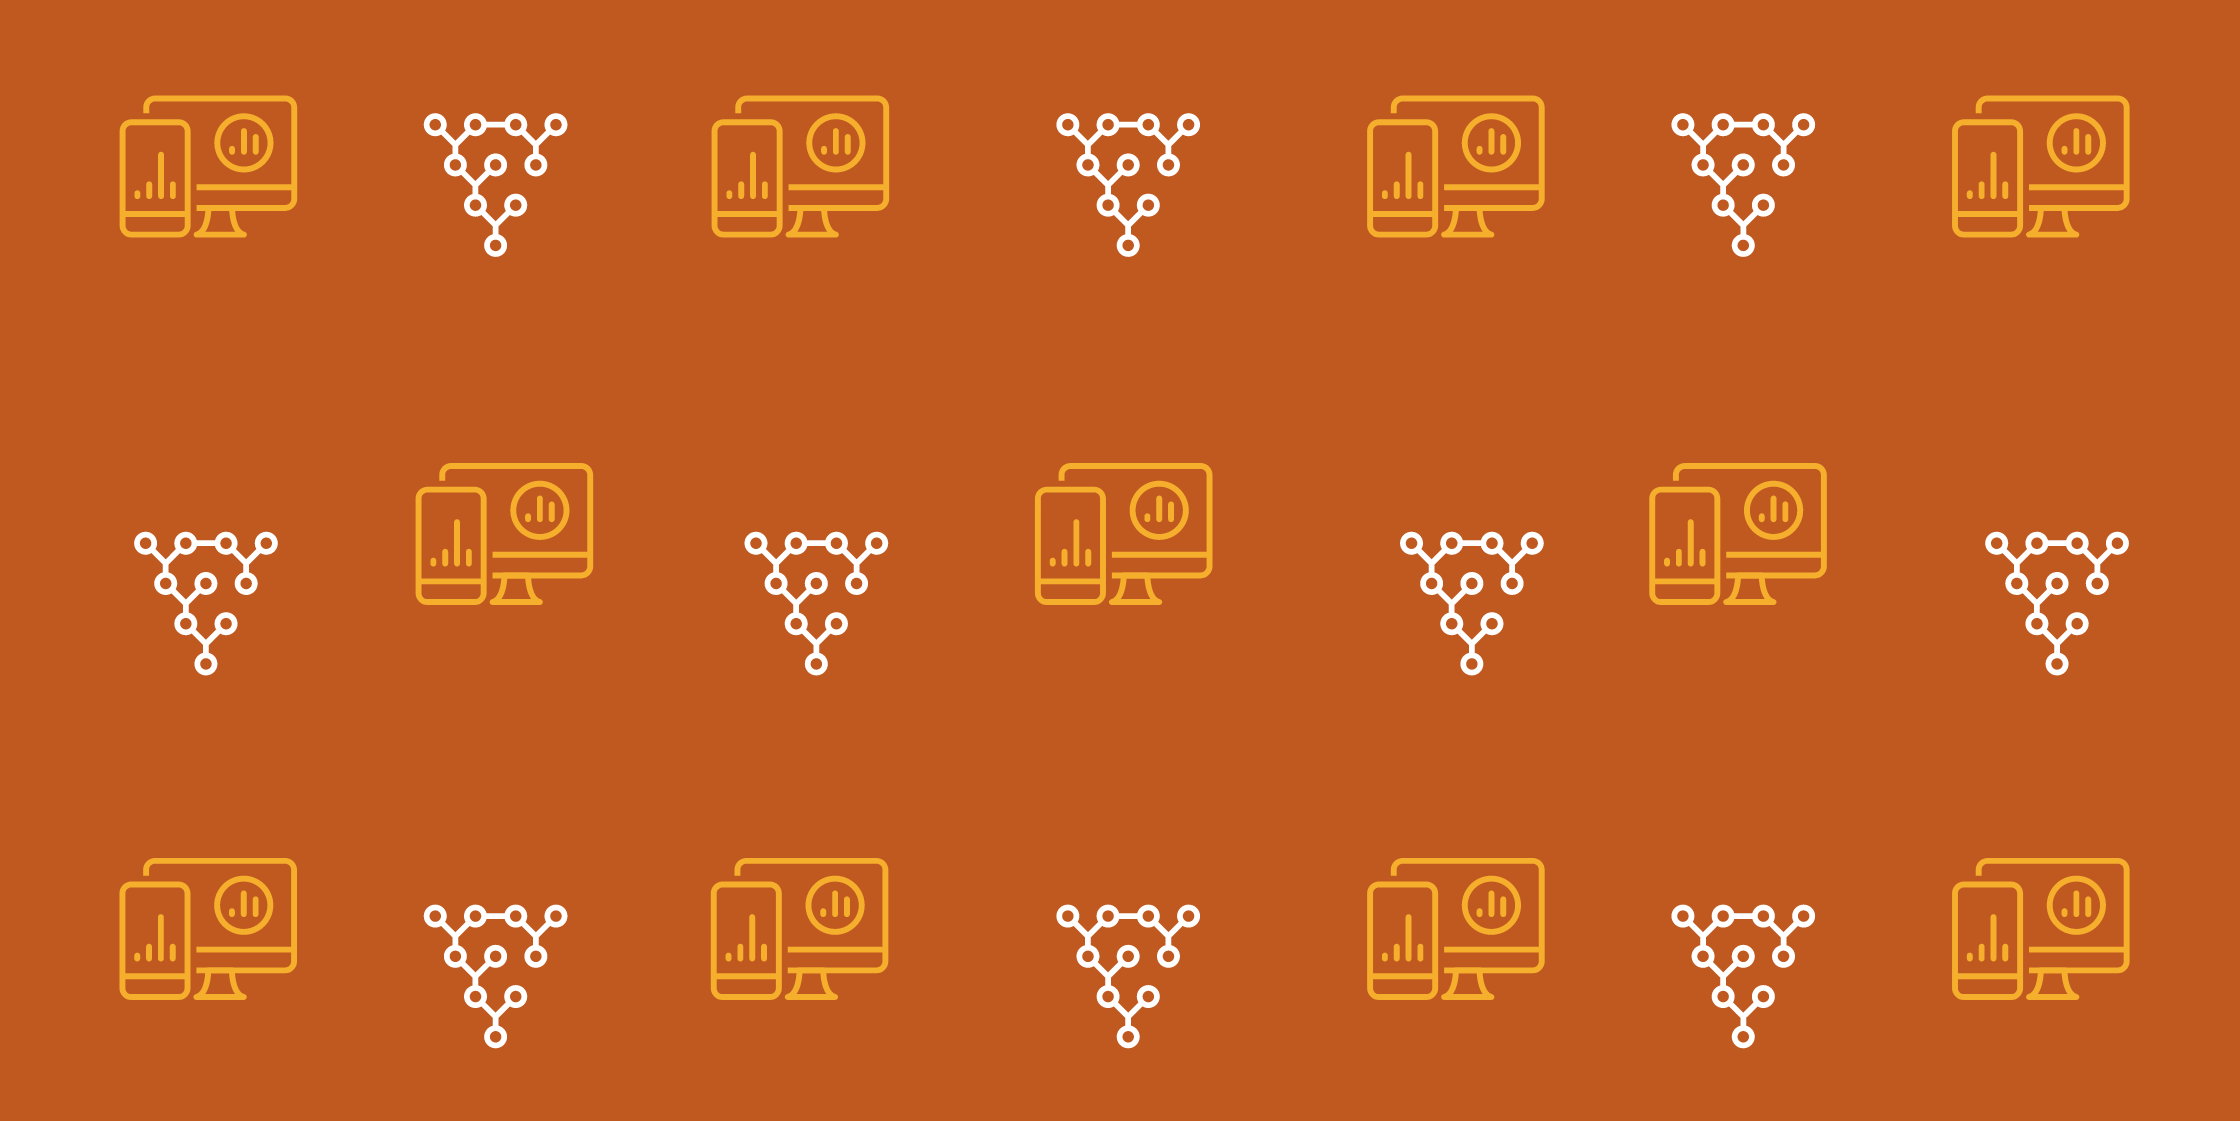 Orange and white pattern with simple computer and data graphics